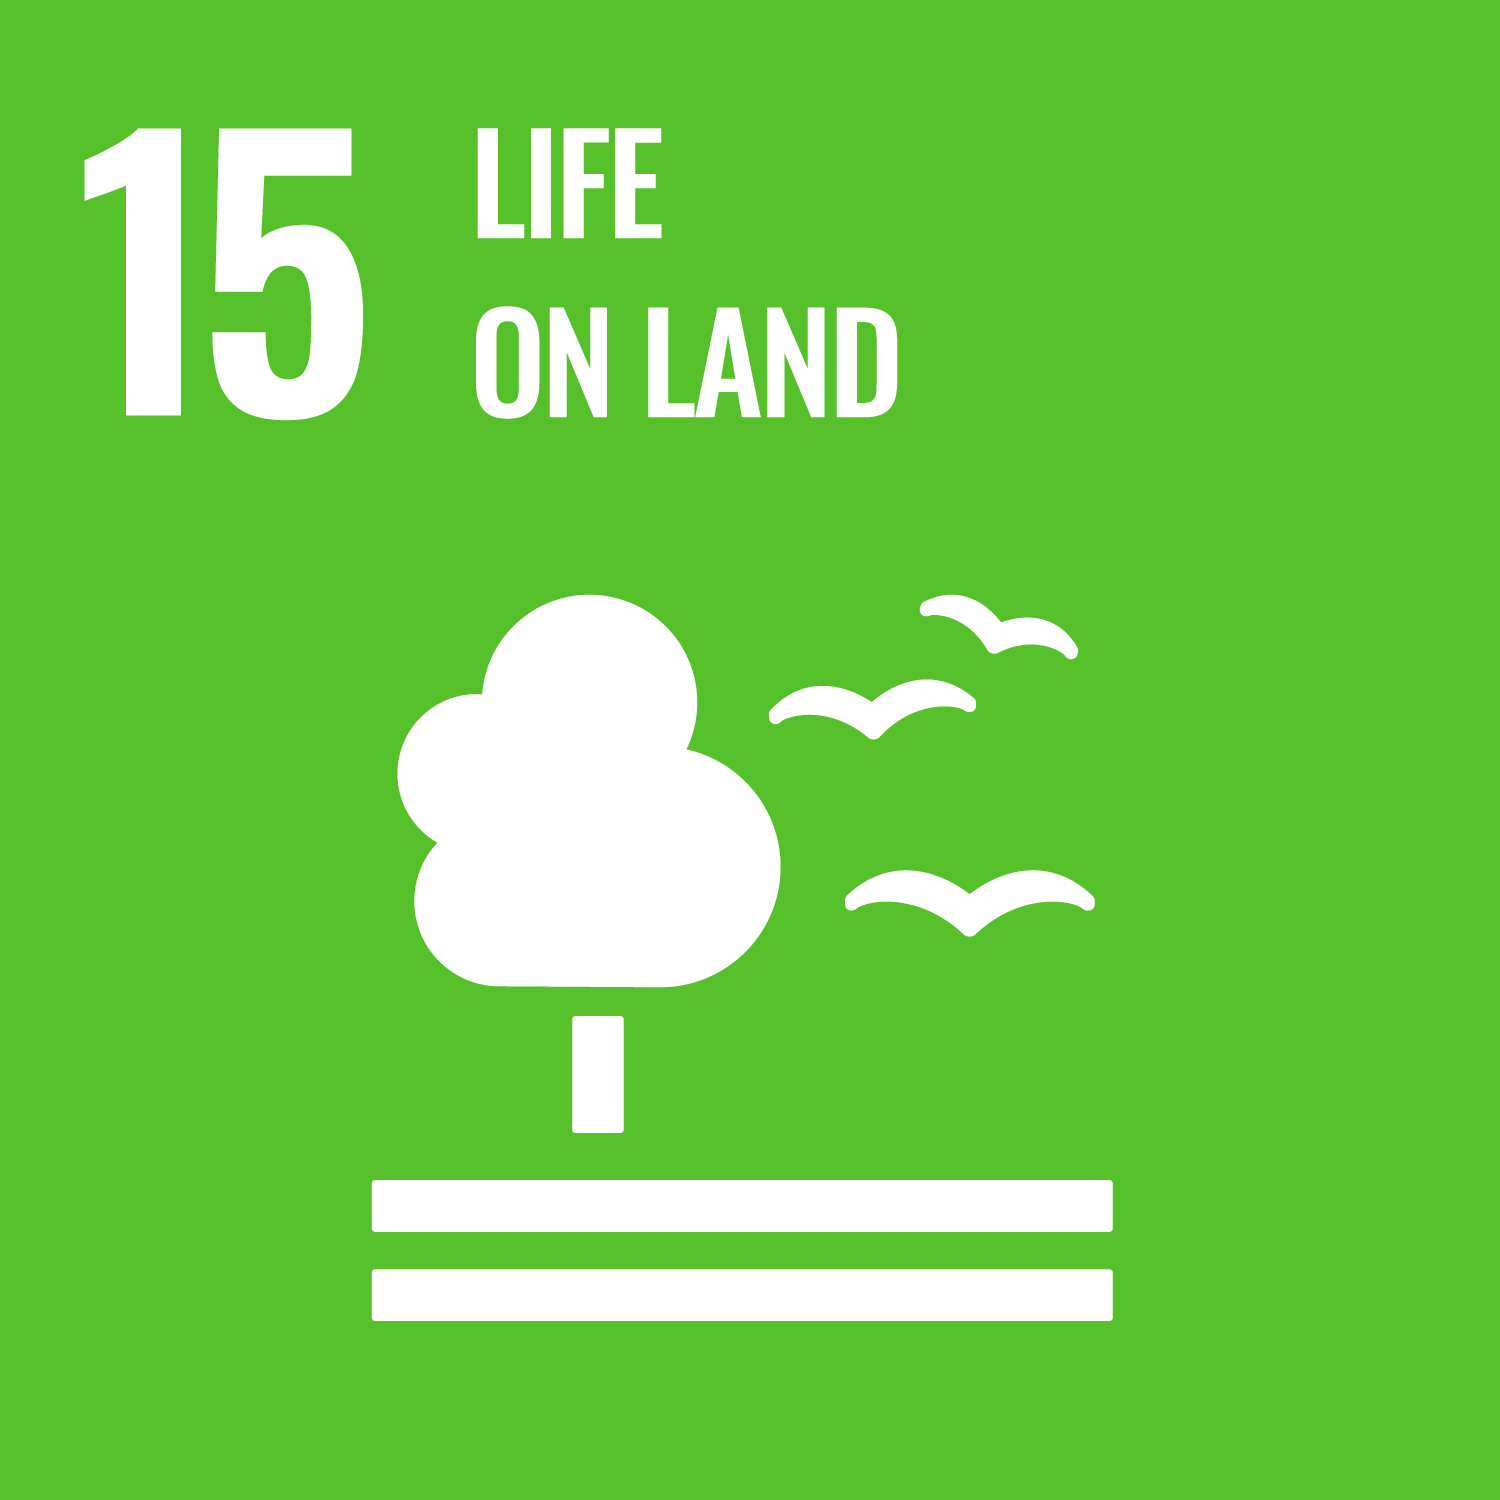 Related UN Sustainable Development Goals icon 7